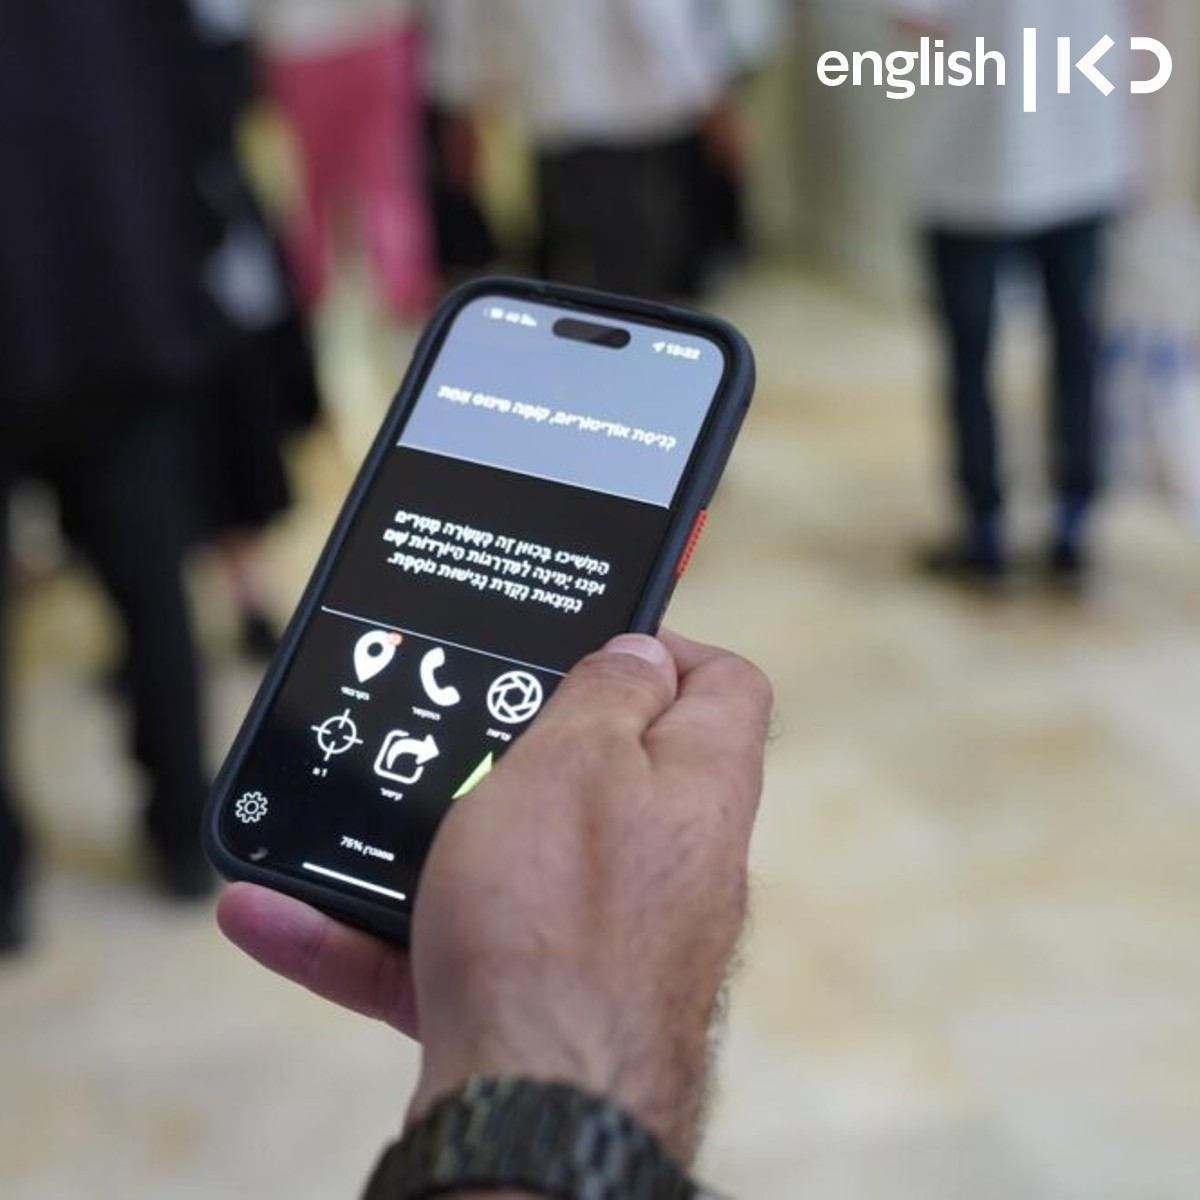 Knesset launches wayfinding system for visually impaired